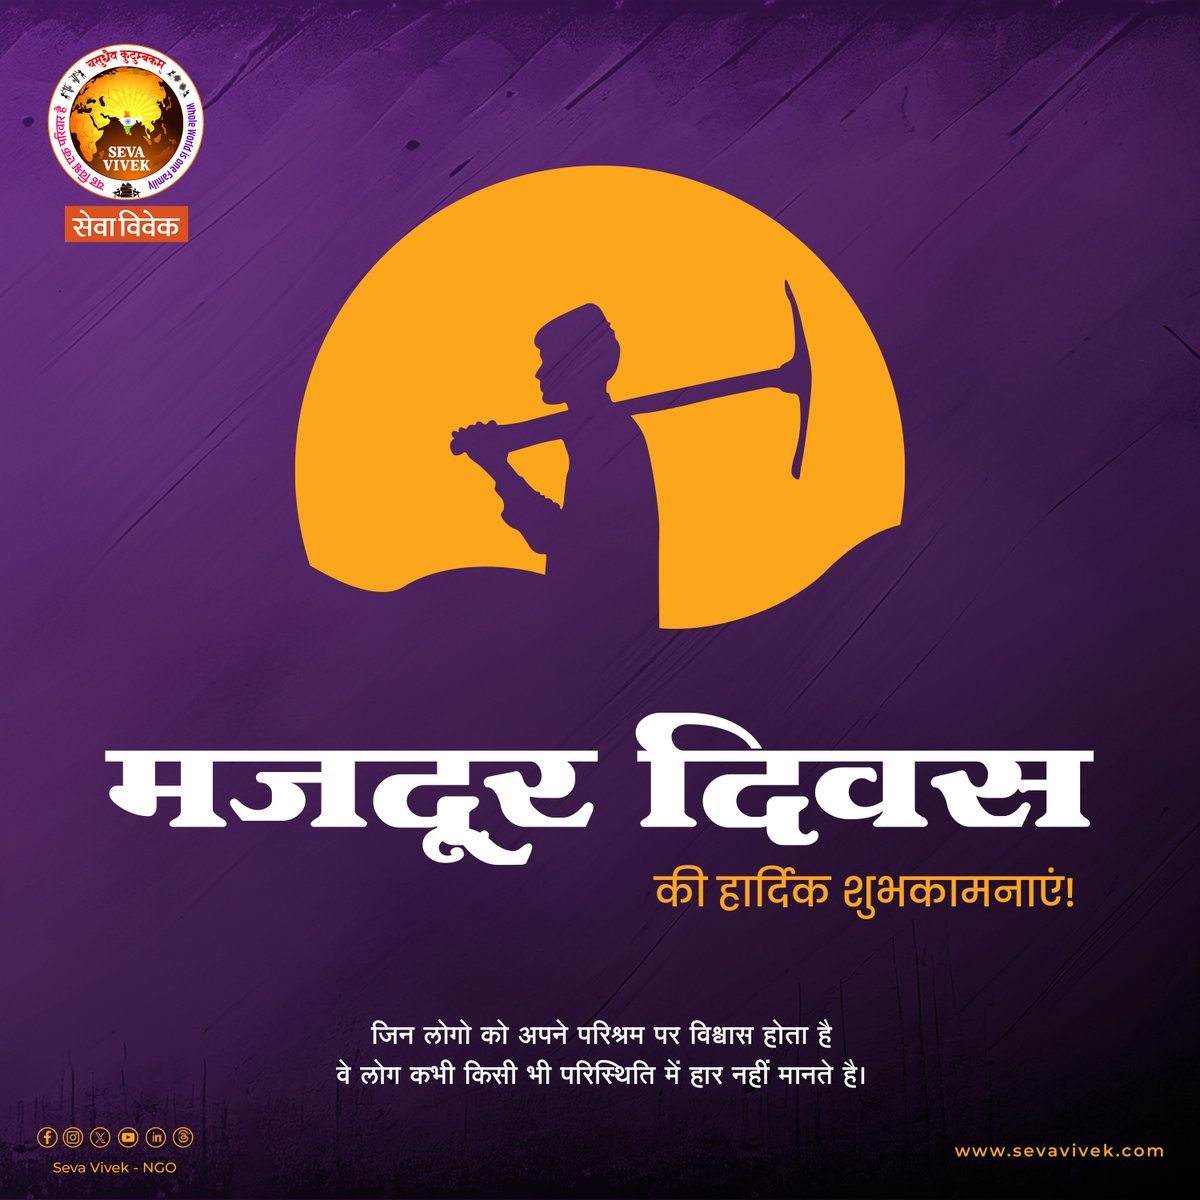 मजदूर दिवस की हार्दिक शुभकामनाएं! 
.
Like, Follow, Save & Share
.
Follow @SevaVivekNGO
.
 #internationalworkersday #workerappreciation #workers #stronger #celebratework #career #thankyouworkers #labourday #recognition #dedication #celebration #bambooproducts #bamboo